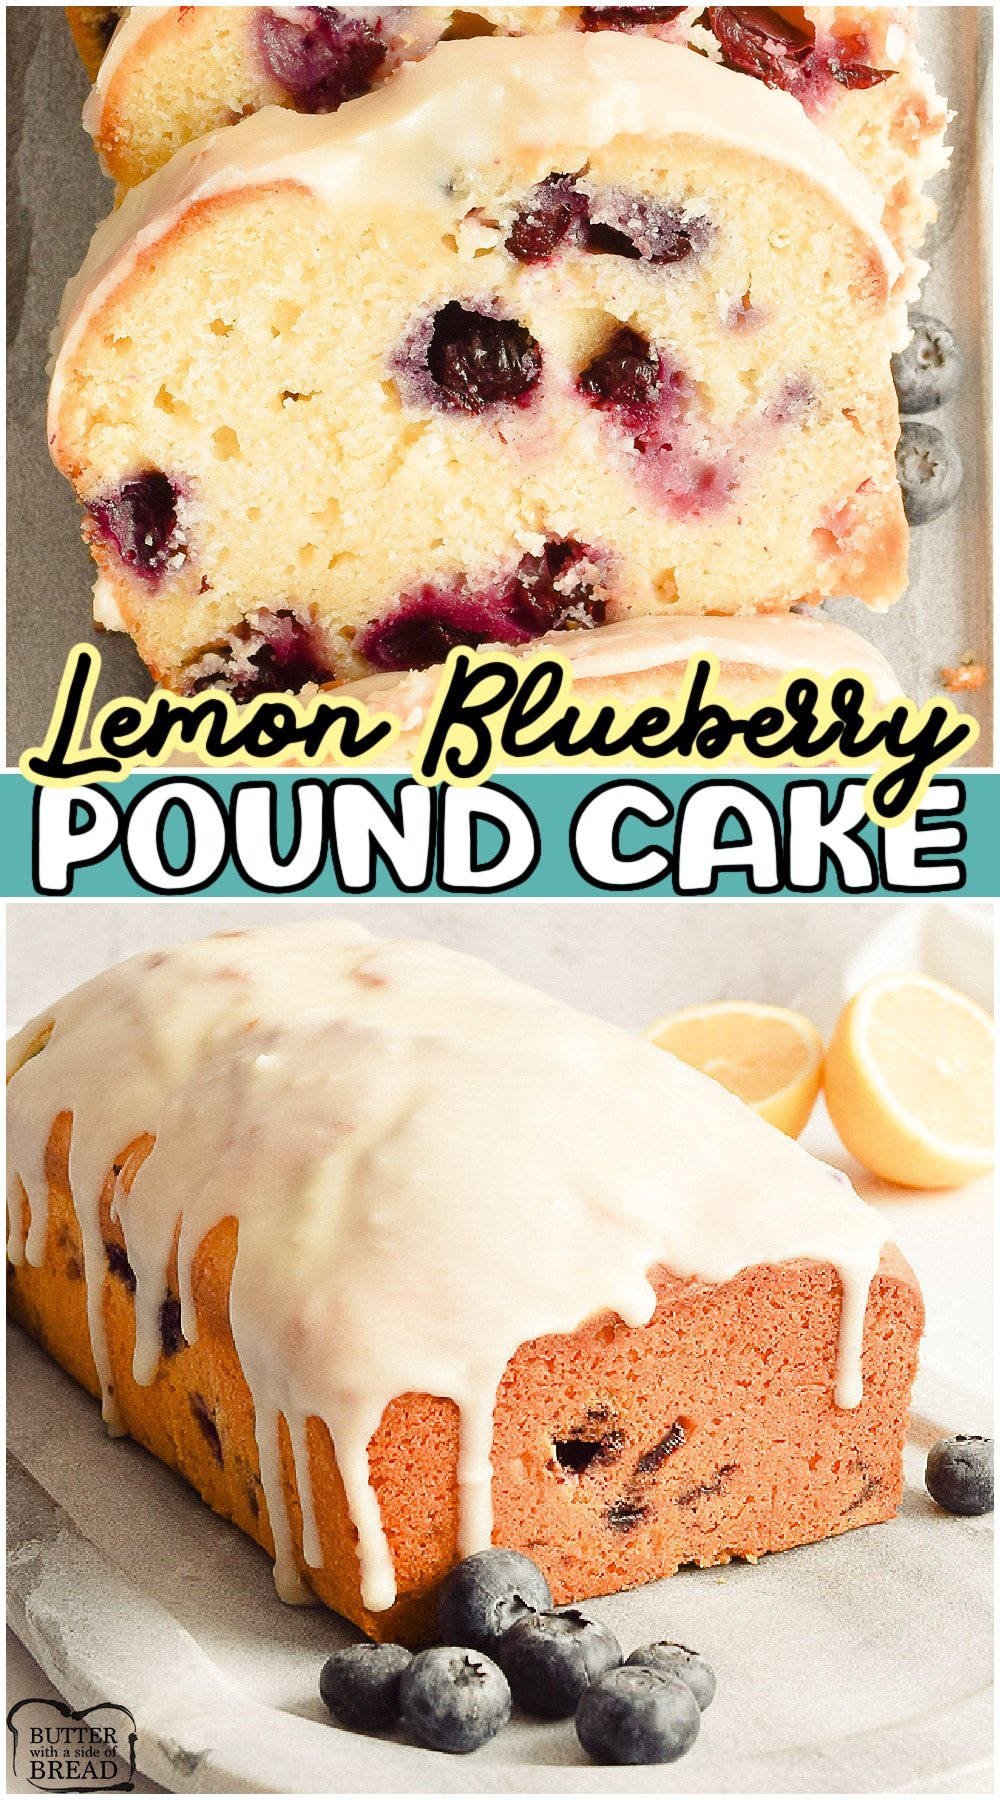 Lemon Blueberry Pound Cake is a delicious dessert packed with so much great taste and fresh berries in every slice. This Lemon Pound Cake recipe is the perfect treat for Spring snacking!